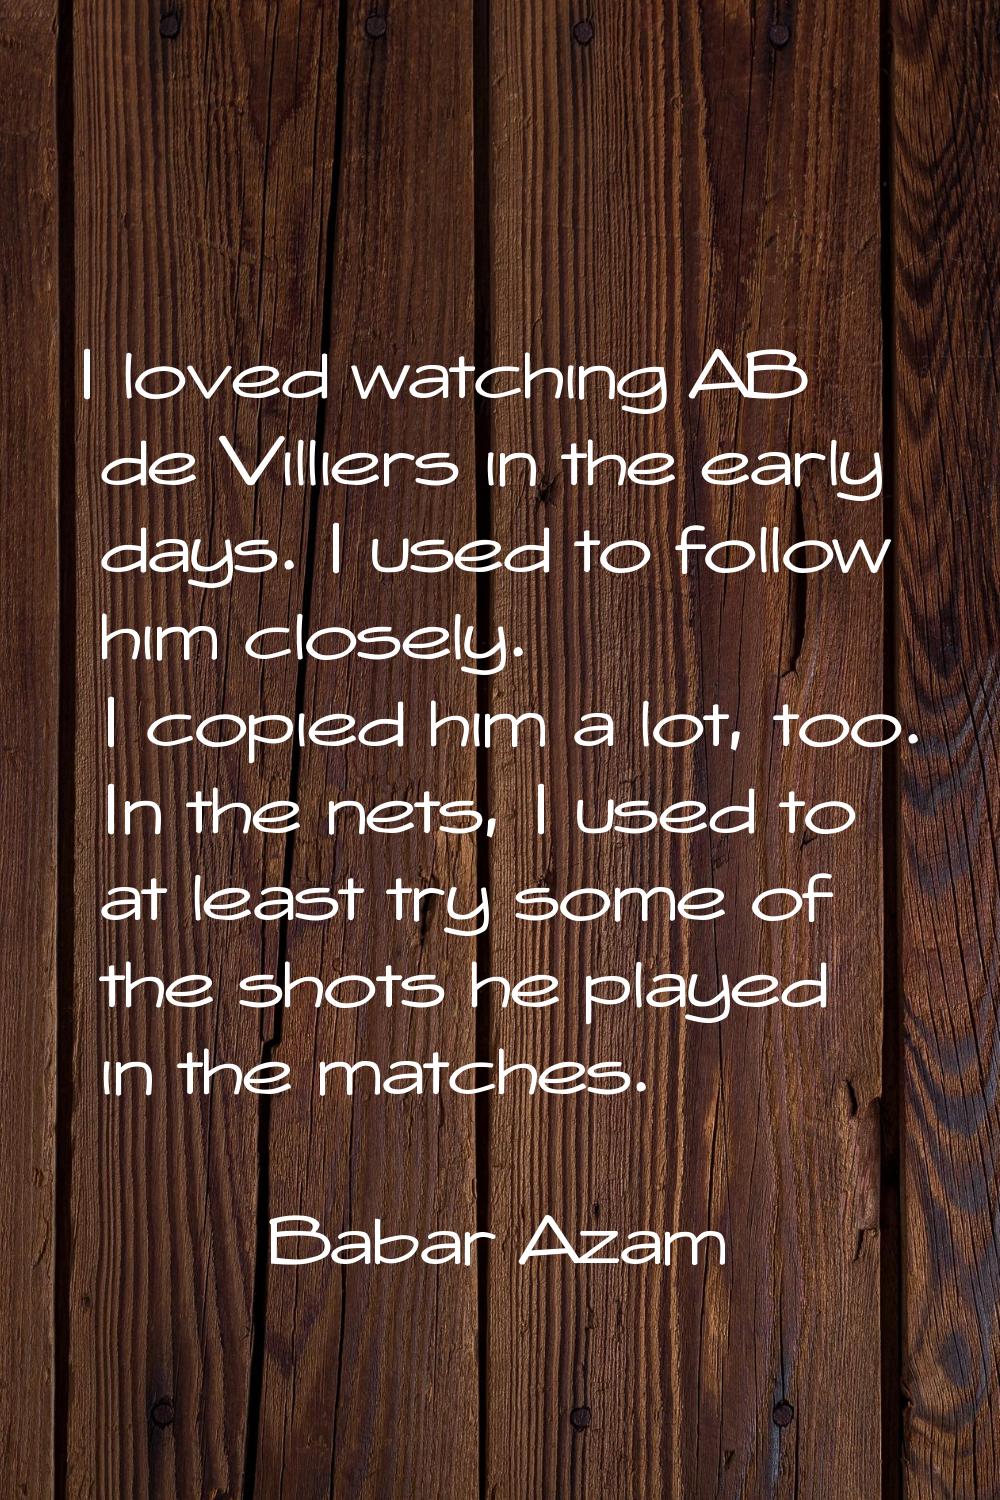 I loved watching AB de Villiers in the early days. I used to follow him closely. I copied him a lot